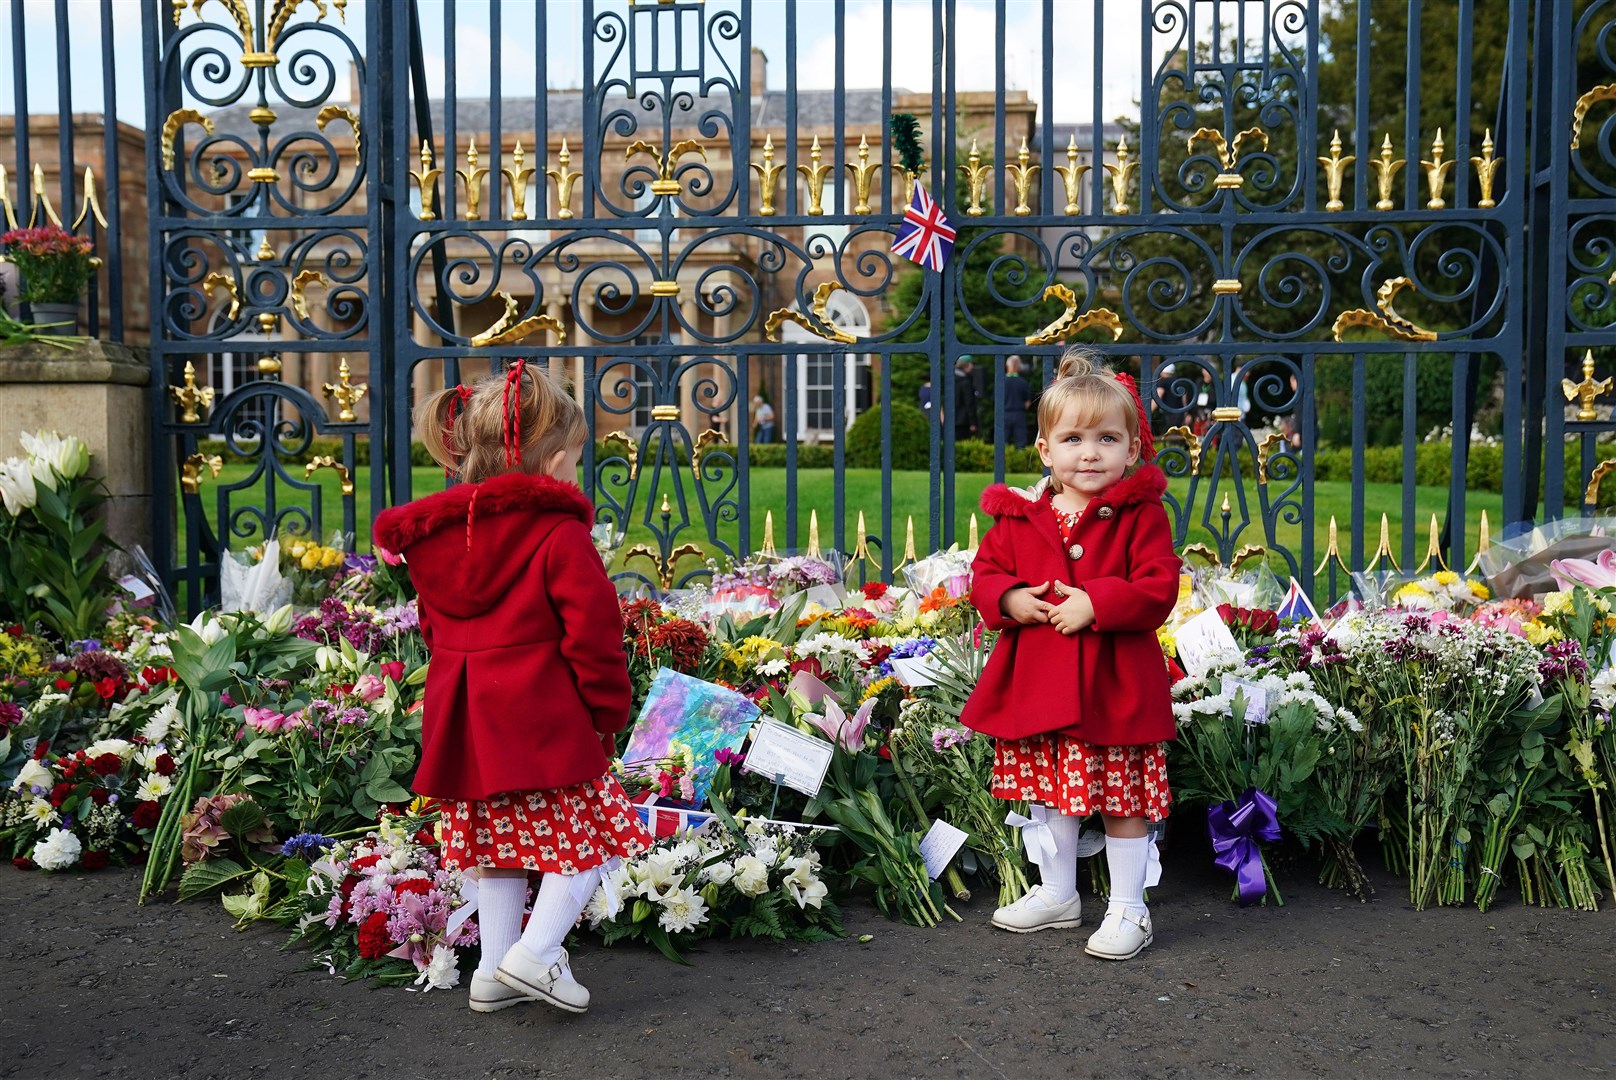 Twins Abigail and Arabella Glen, aged two, from Lisburn, at the gates of Hillsborough Castle, Co Down (Brain Lawless/PA)